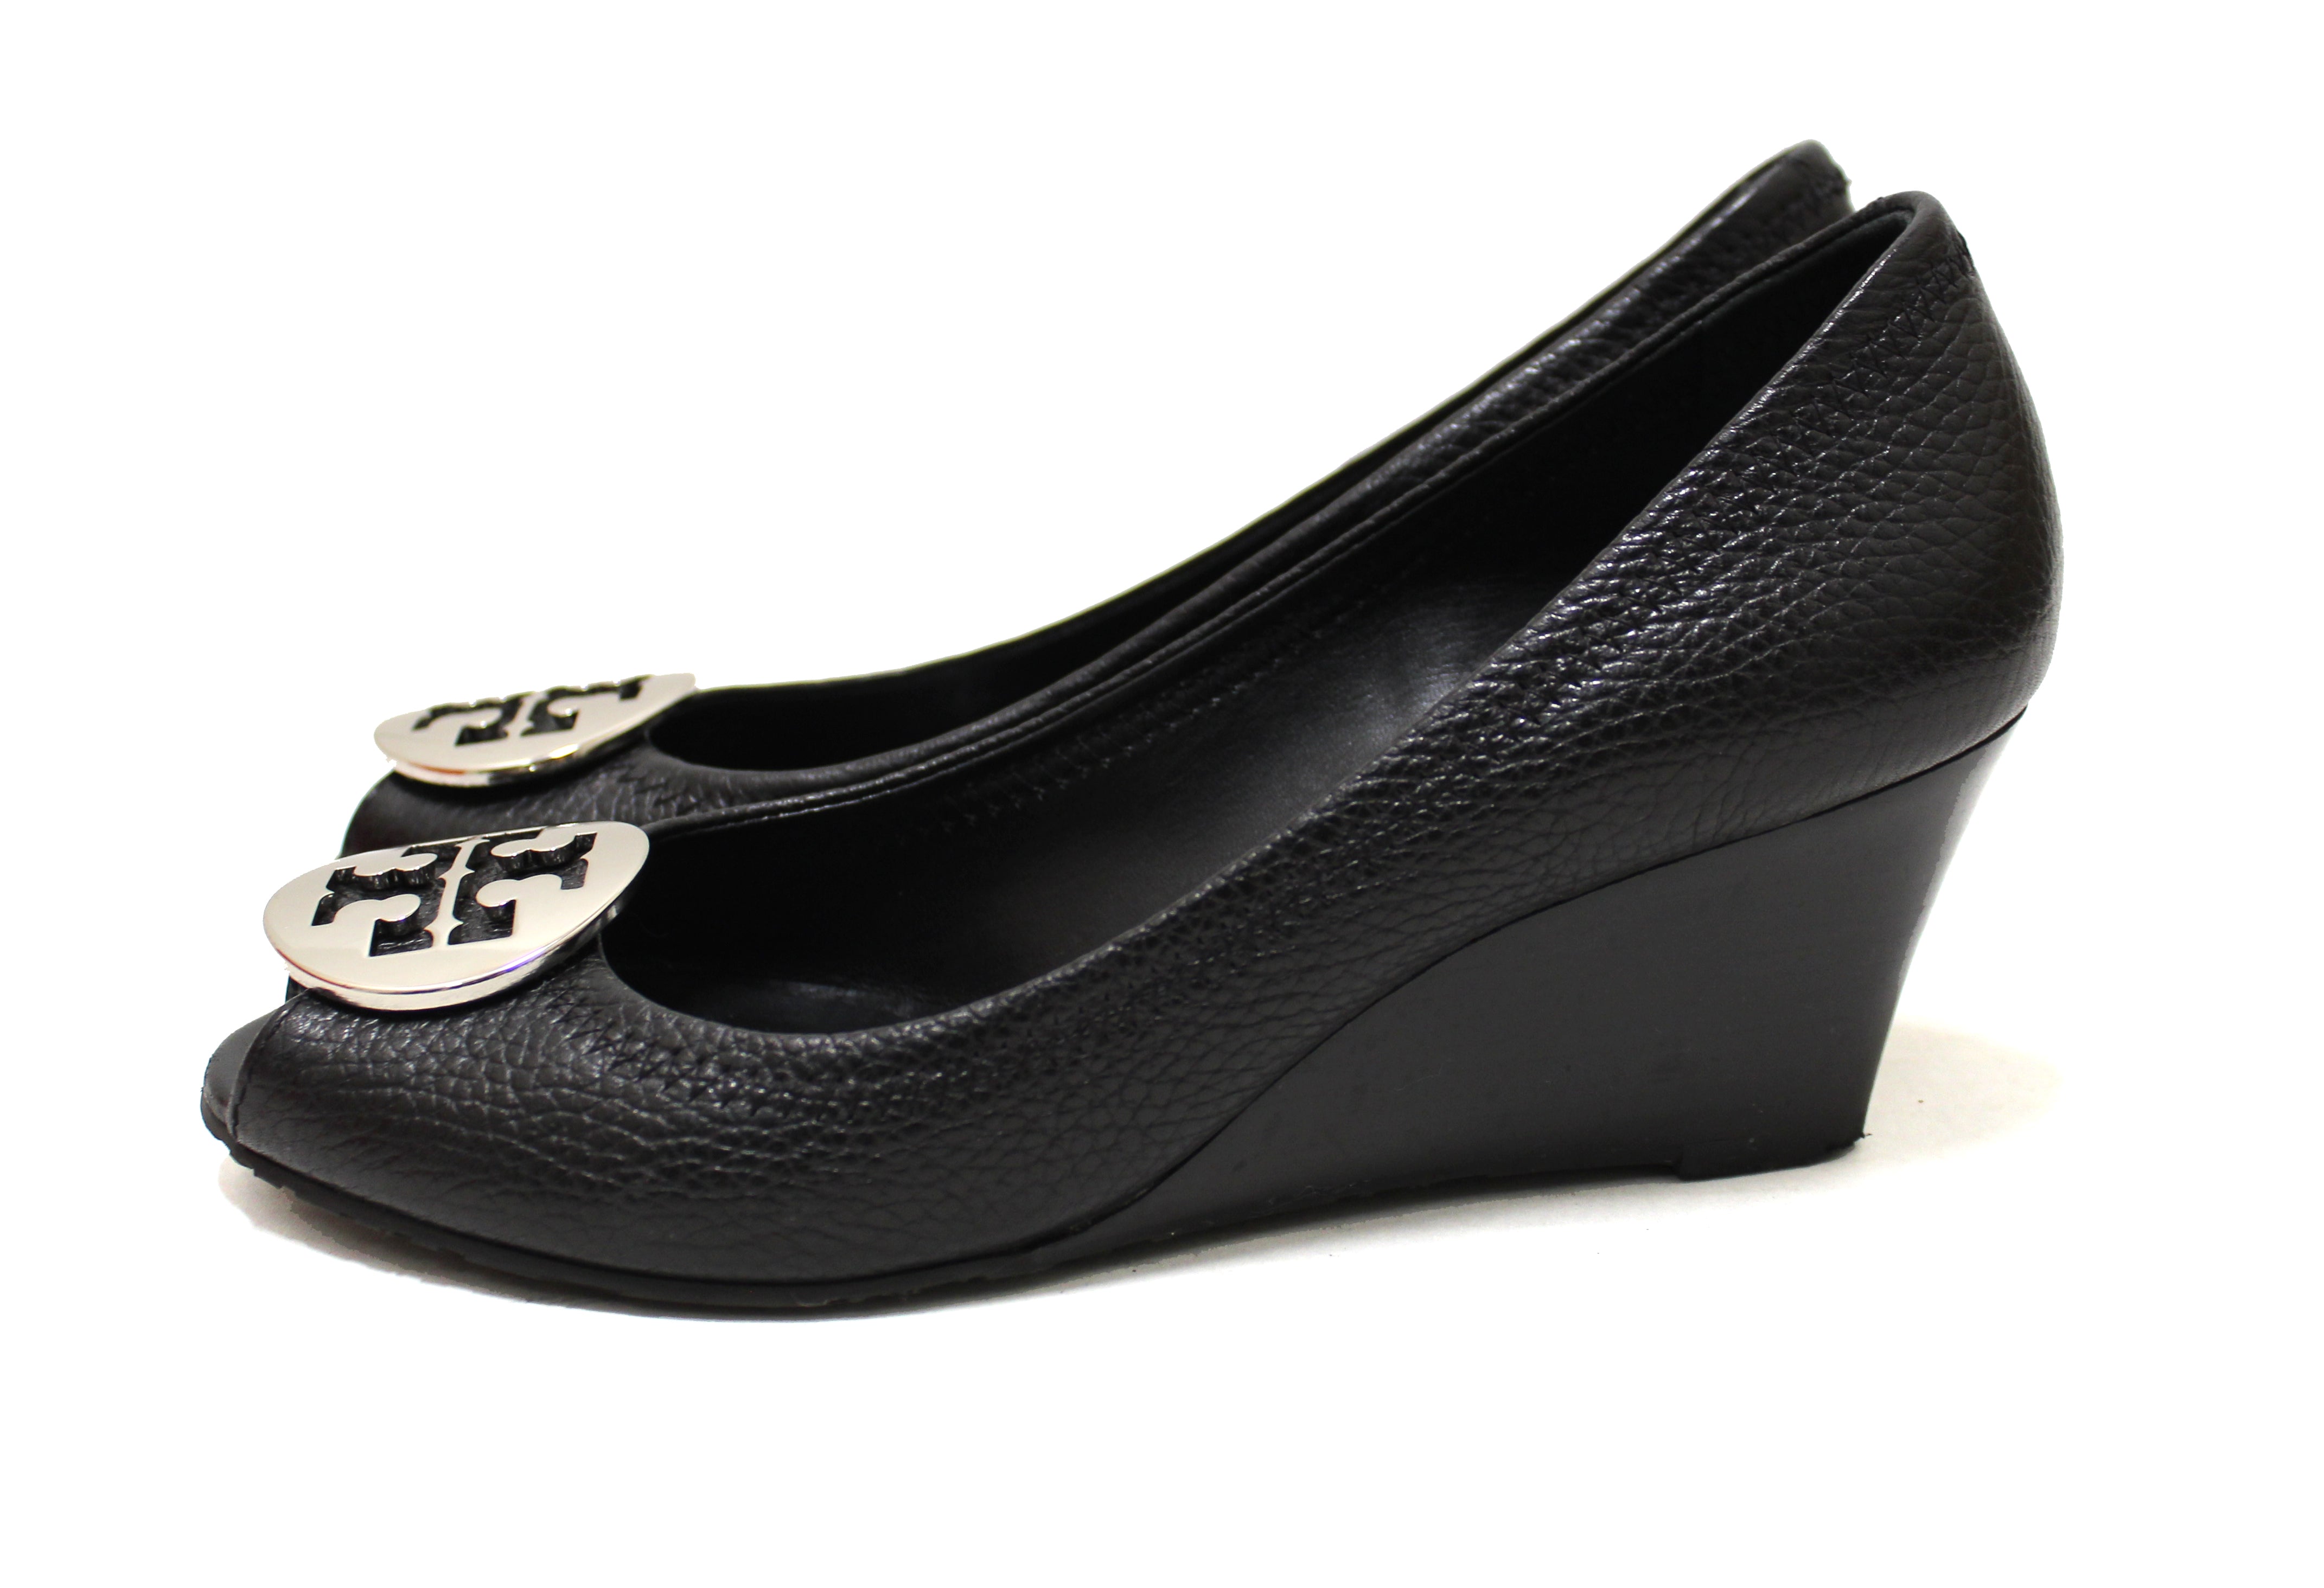 Authentic Tory Burch Sally 2 Black Leather Peep Toe Wedge Heel size 7. –  Paris Station Shop